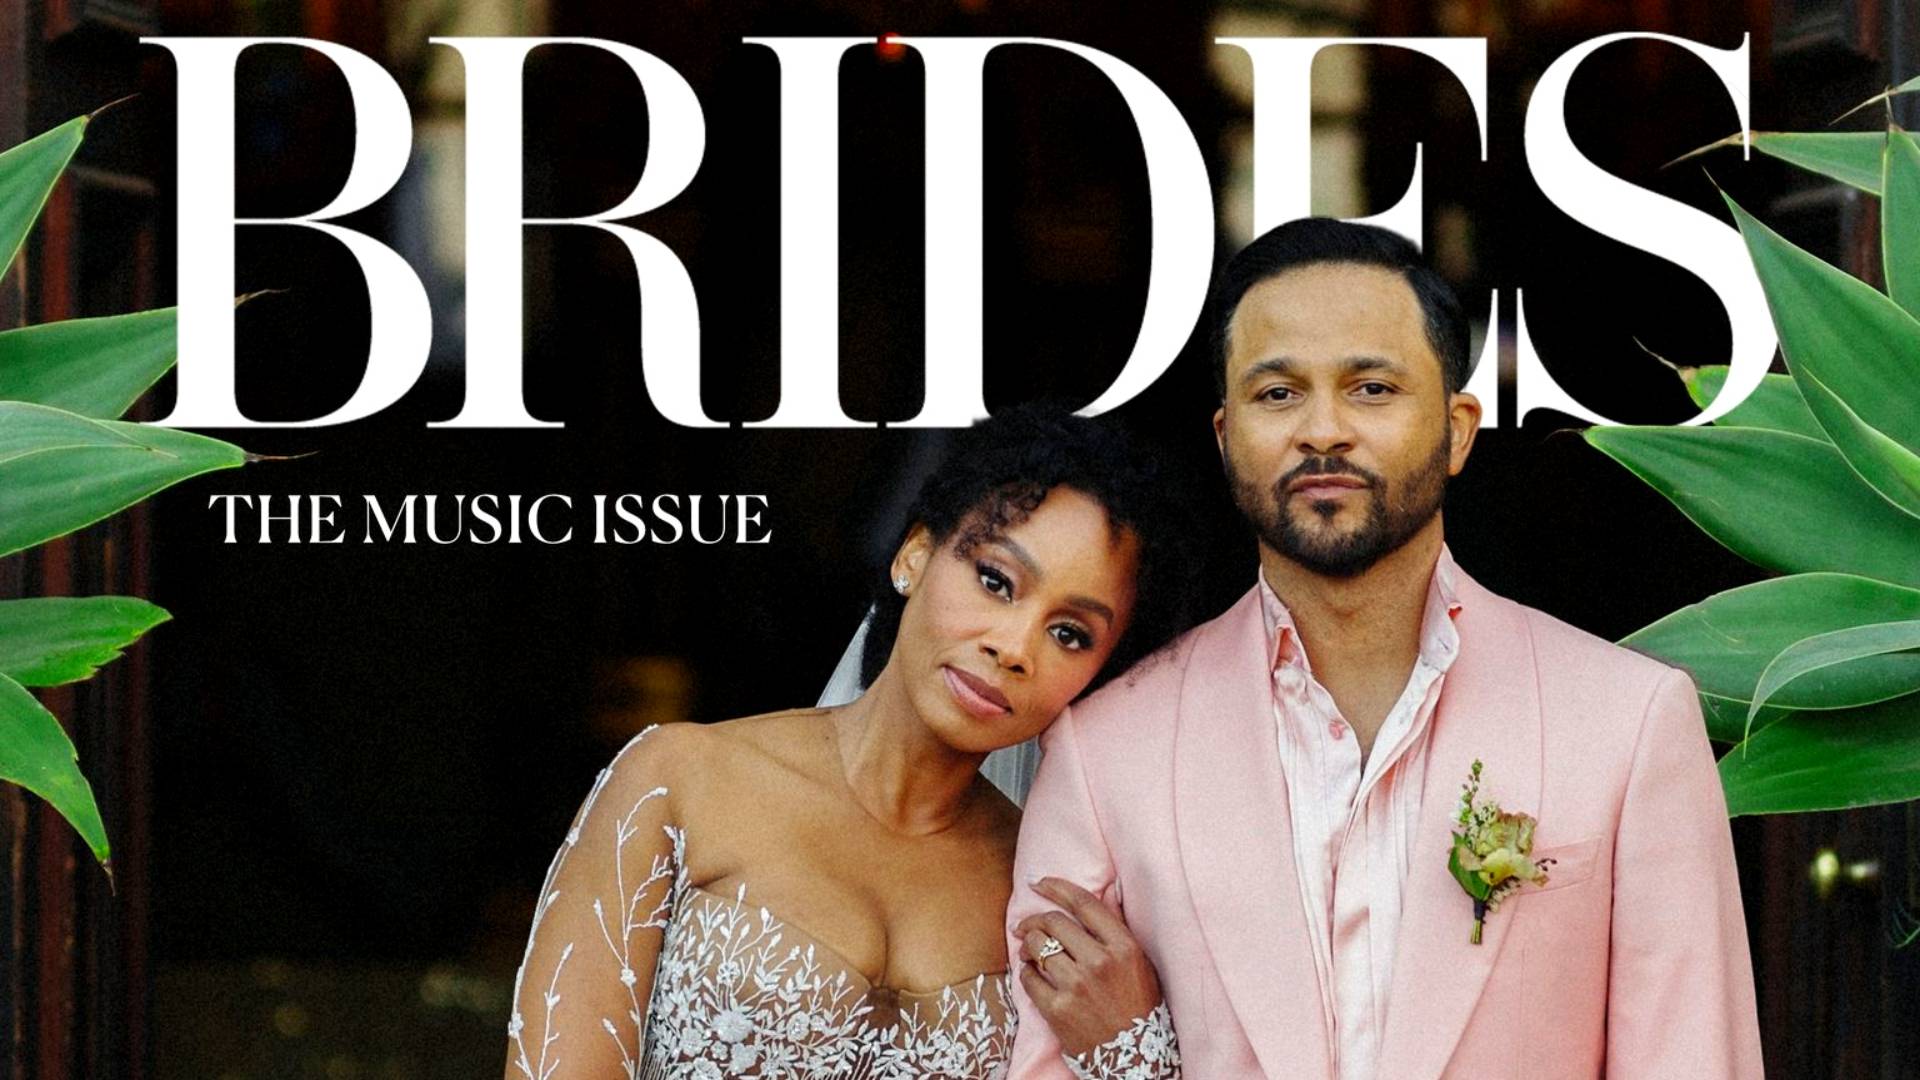 Anika Noni Rose And Jason Dirden Secretly Marry With A Lovely Outdoor Wedding Ceremony—Here’s What We Know! 